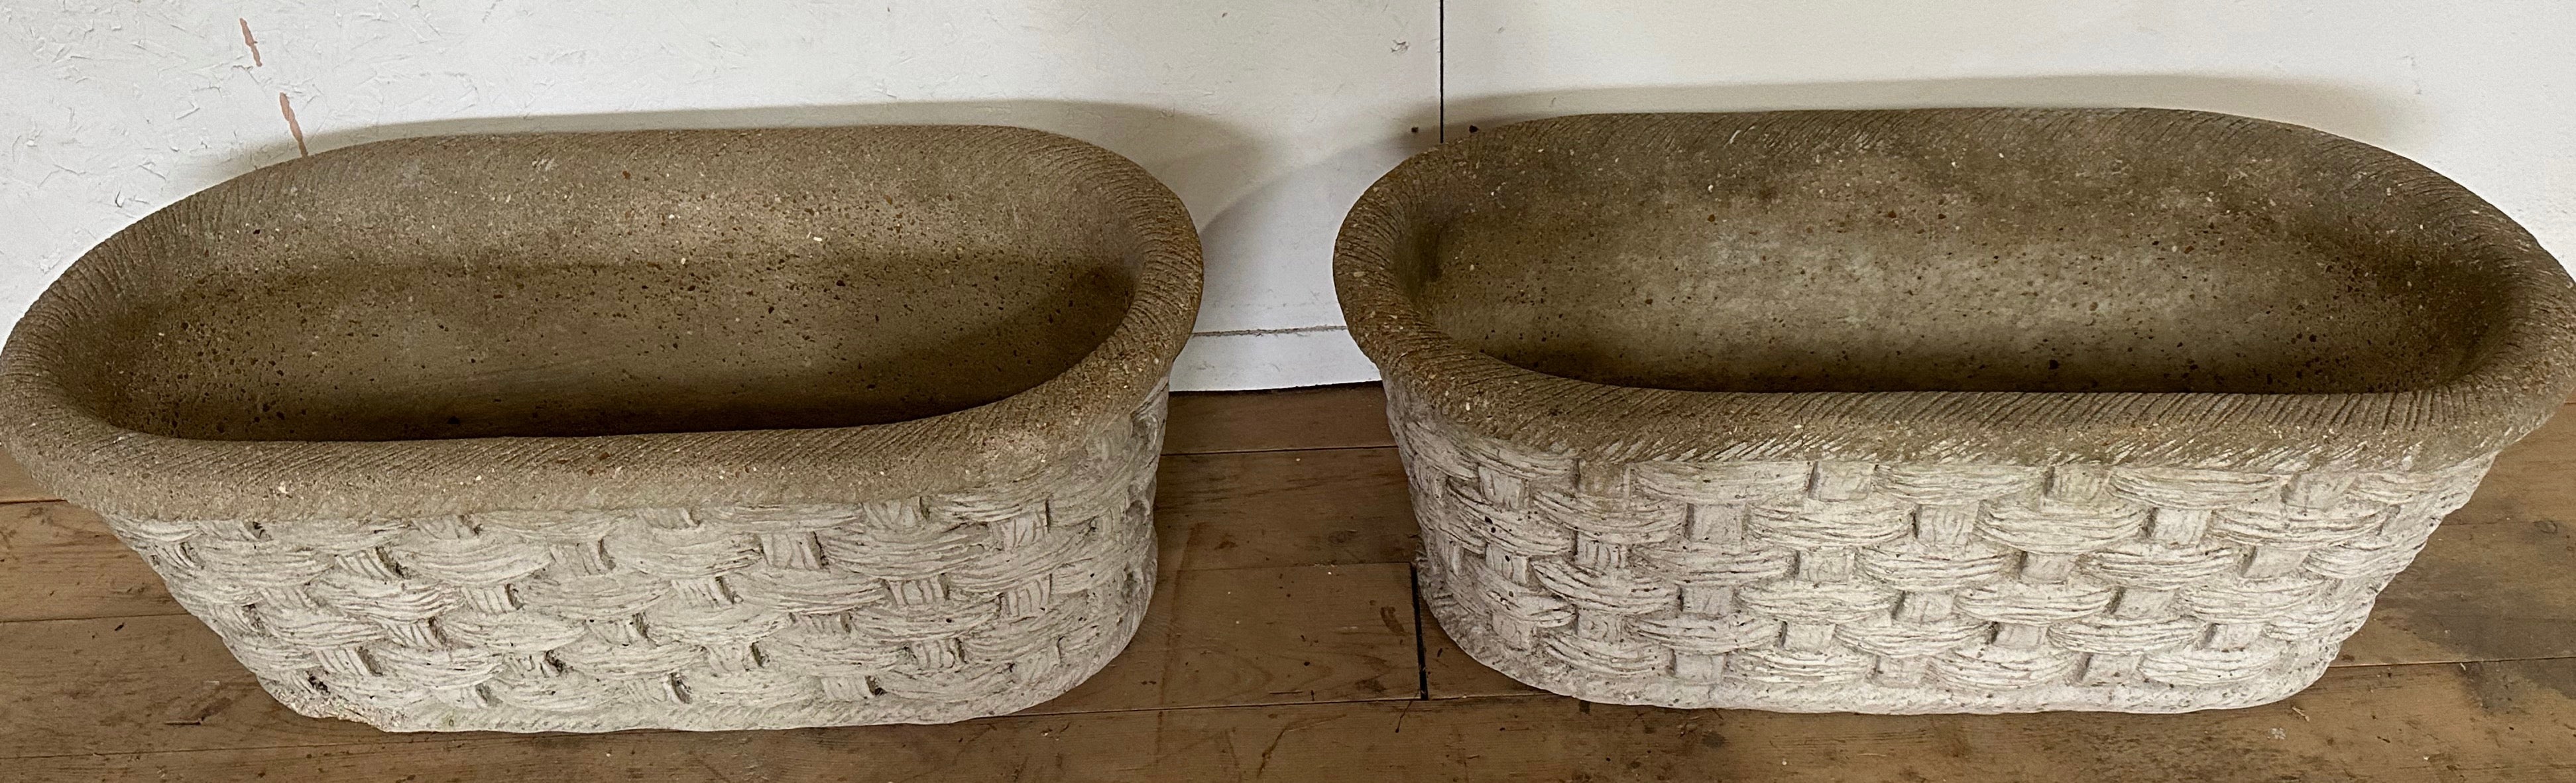 3 Classical Basket Weave Garden Planters -- SOLD SINGLY.
Excellent large oval shaped planters, decorated with basket weave and roped edge.
They are in good condition, and a wonderful weathered look with 2 drainage holes
Search terms:  Gustavian